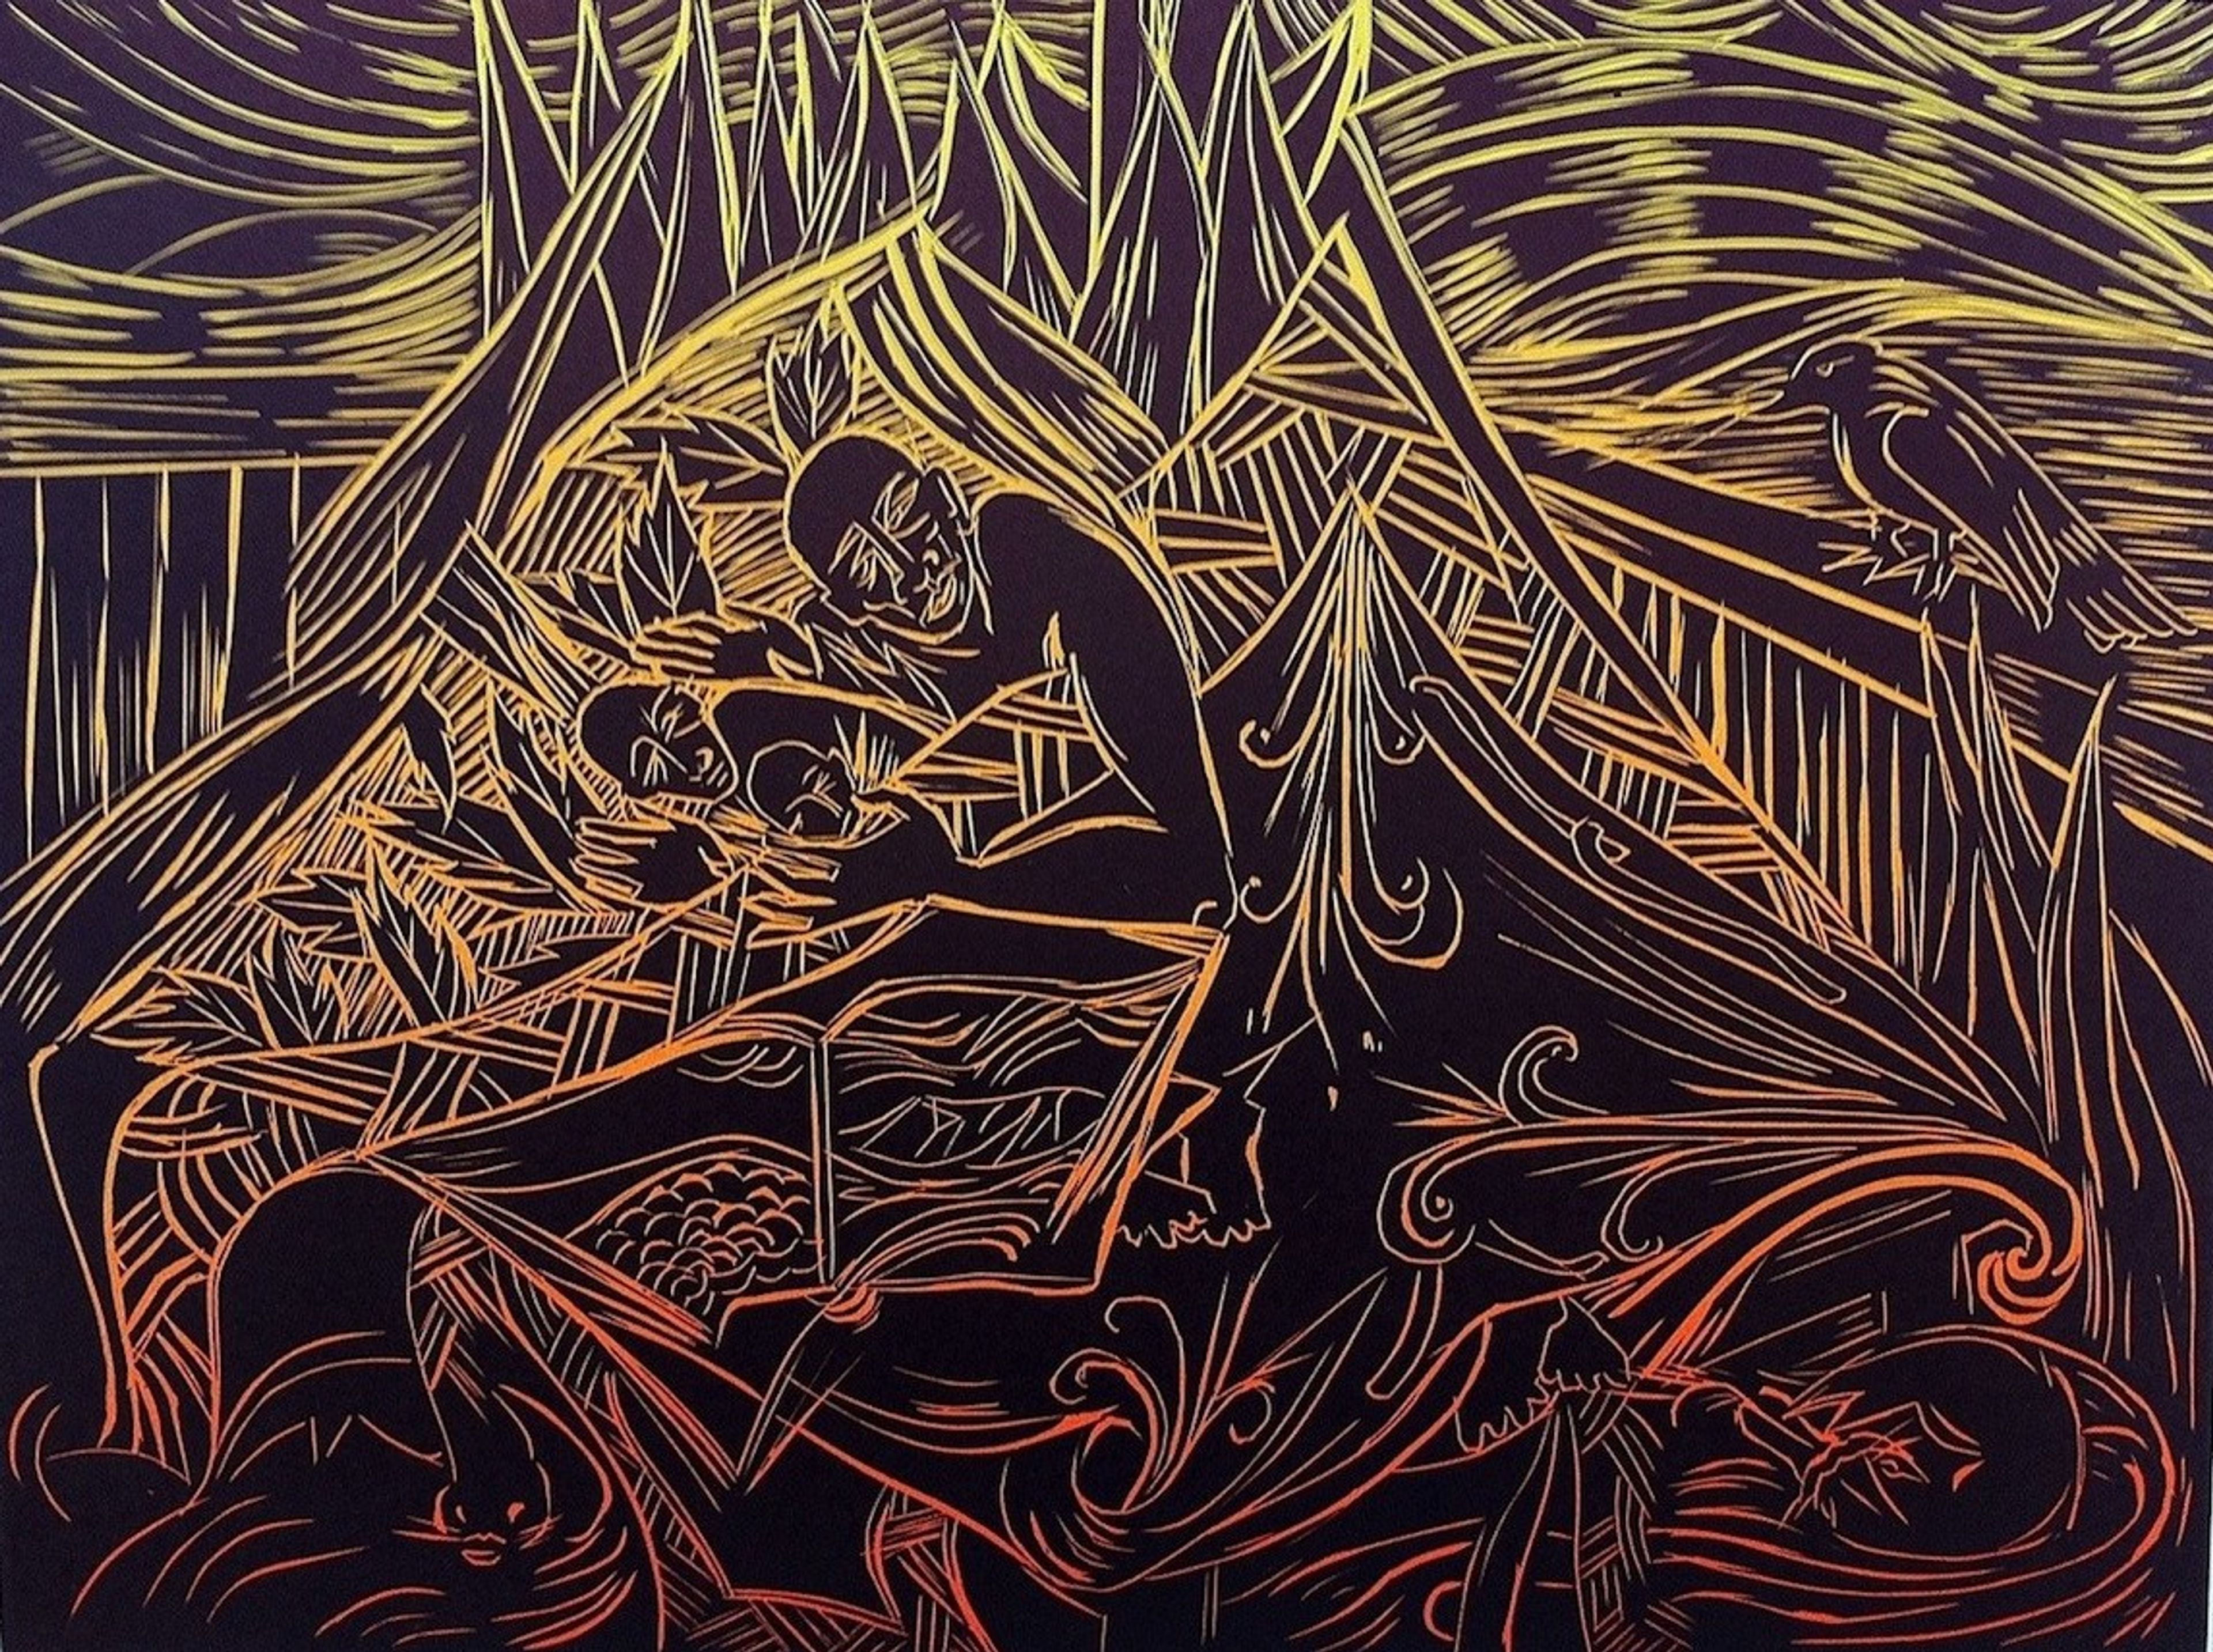 linocut of people caught in waves, orange and red lines on black background